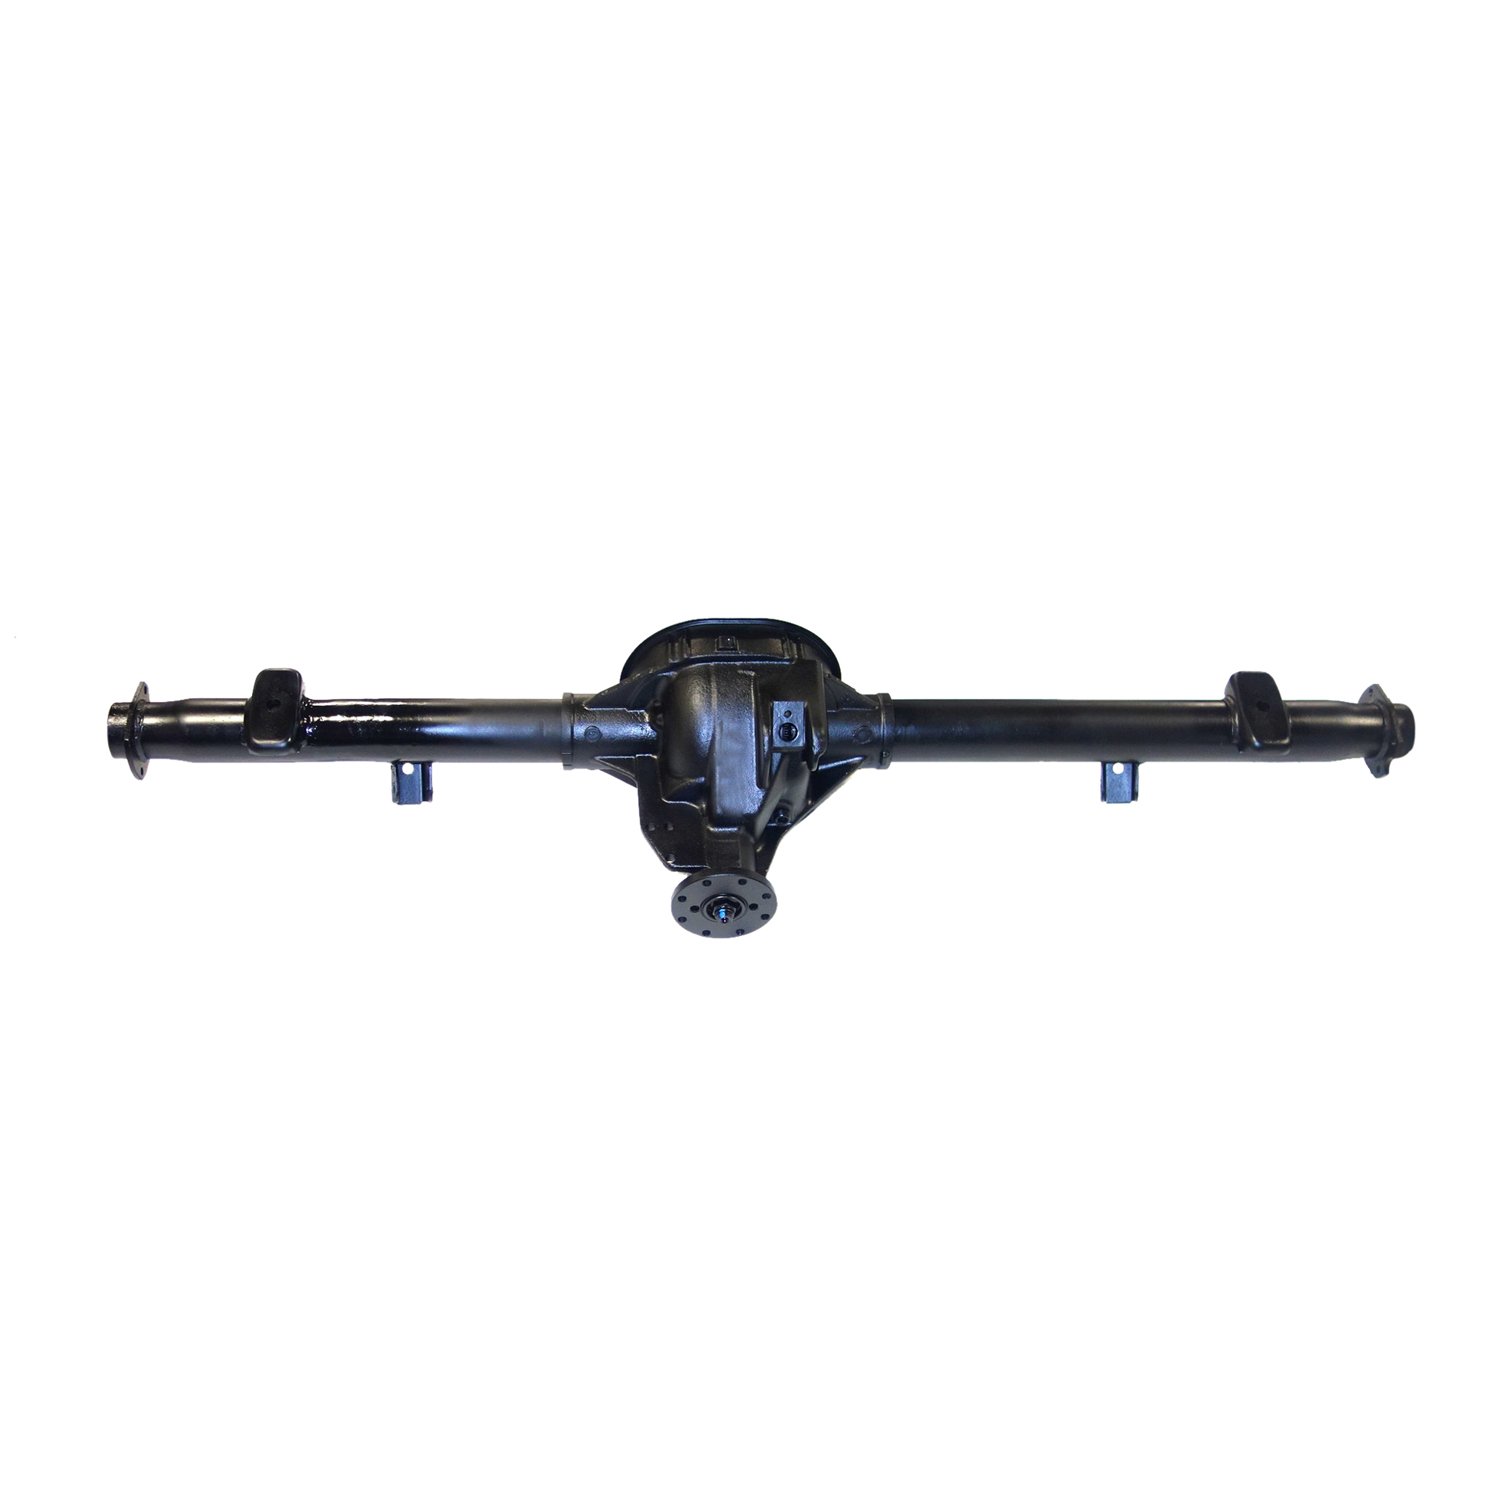 Remanufactured Axle Assy for 8.8" 2000 F150 3.55 , Rear Disc, Posi LSD *Check Tag*